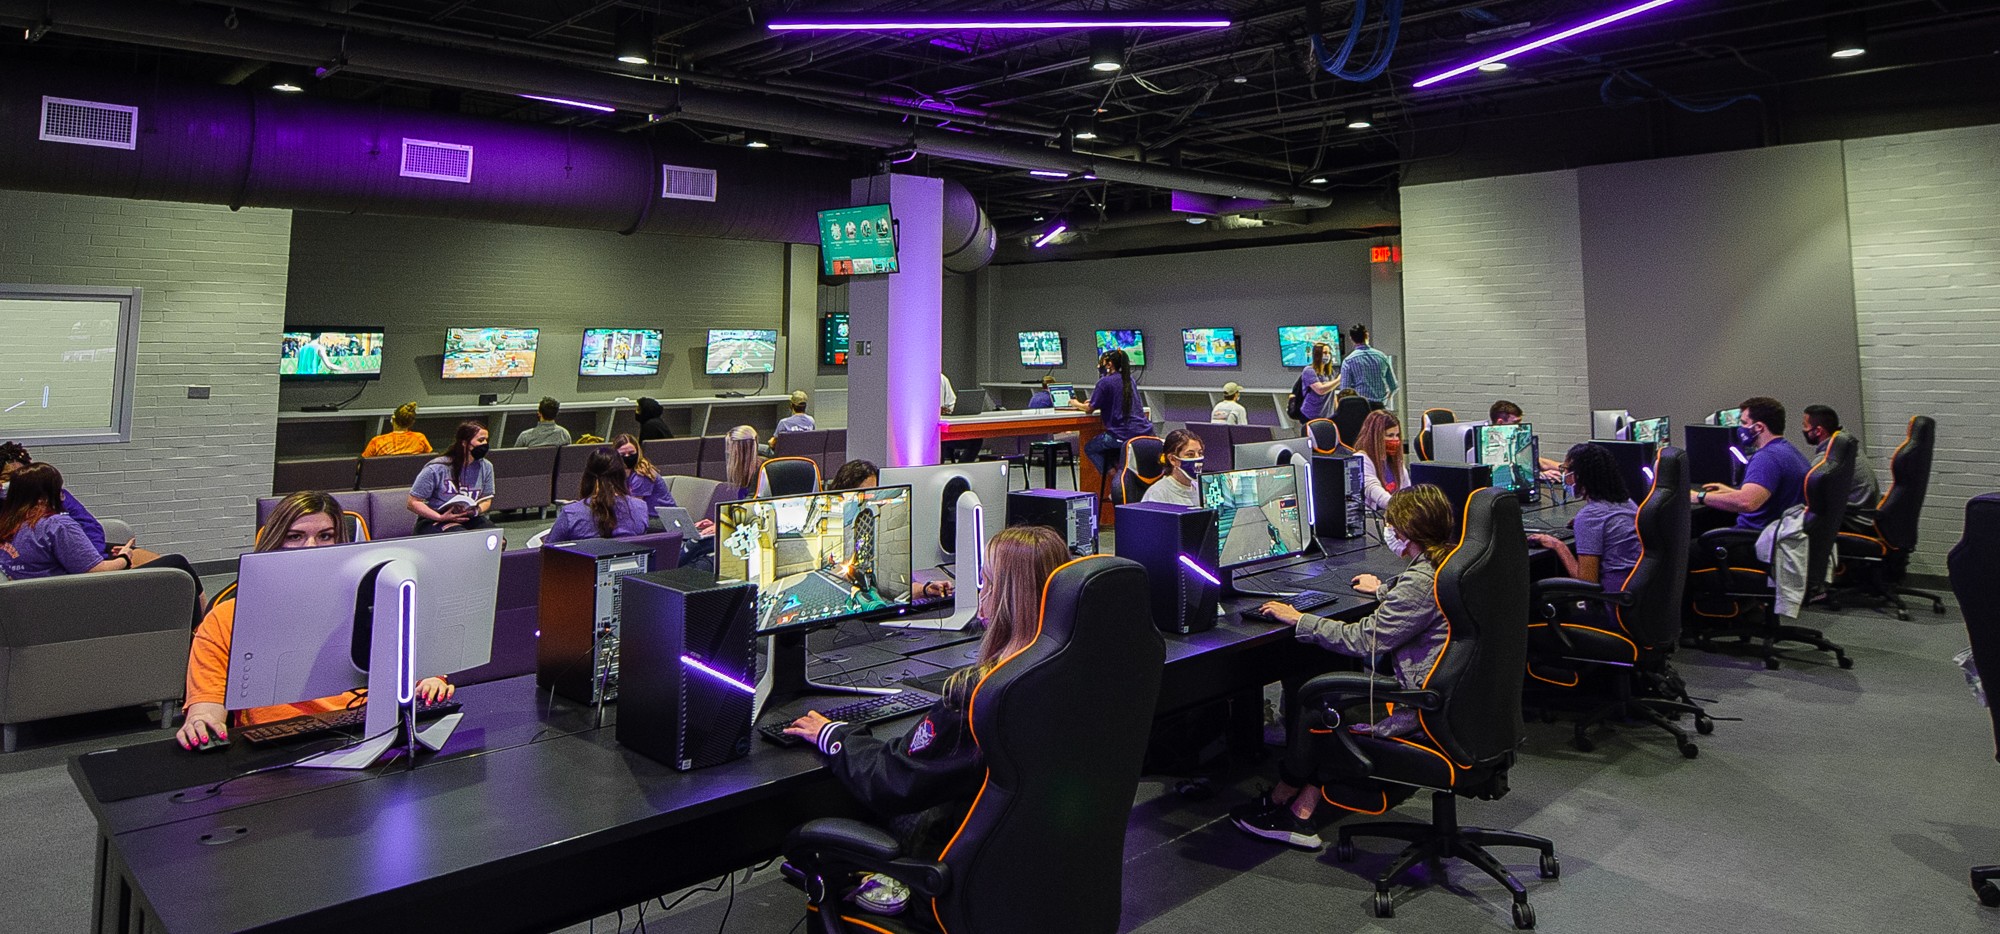 Masked students sit in a purple-lit computer lab engaging in a gaming competition.